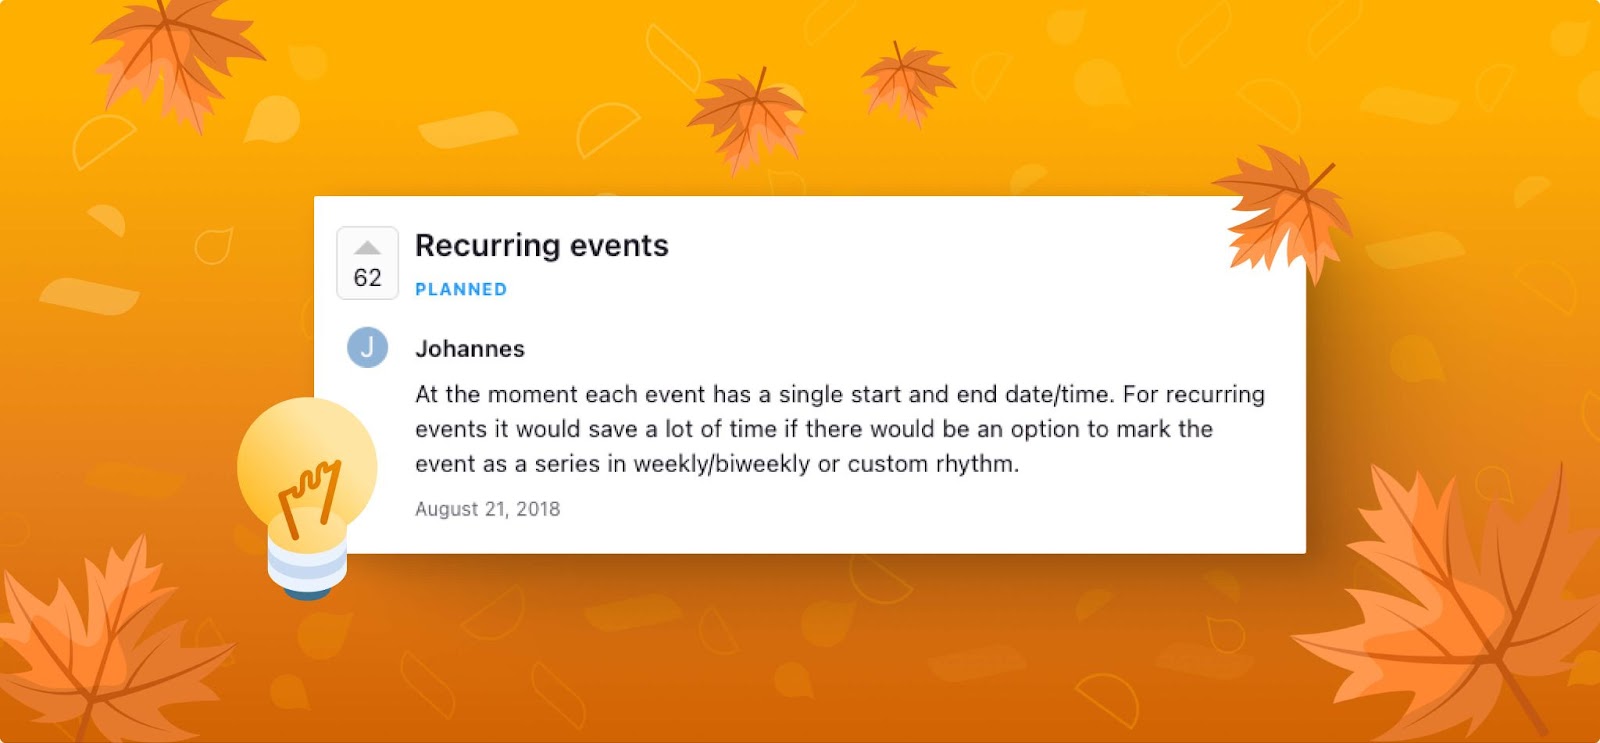 Linchpin Intranet Suite 5.8: Your Intranet just got better! - screenshot 
 of the feature request for recurring events with an orange autumnal background